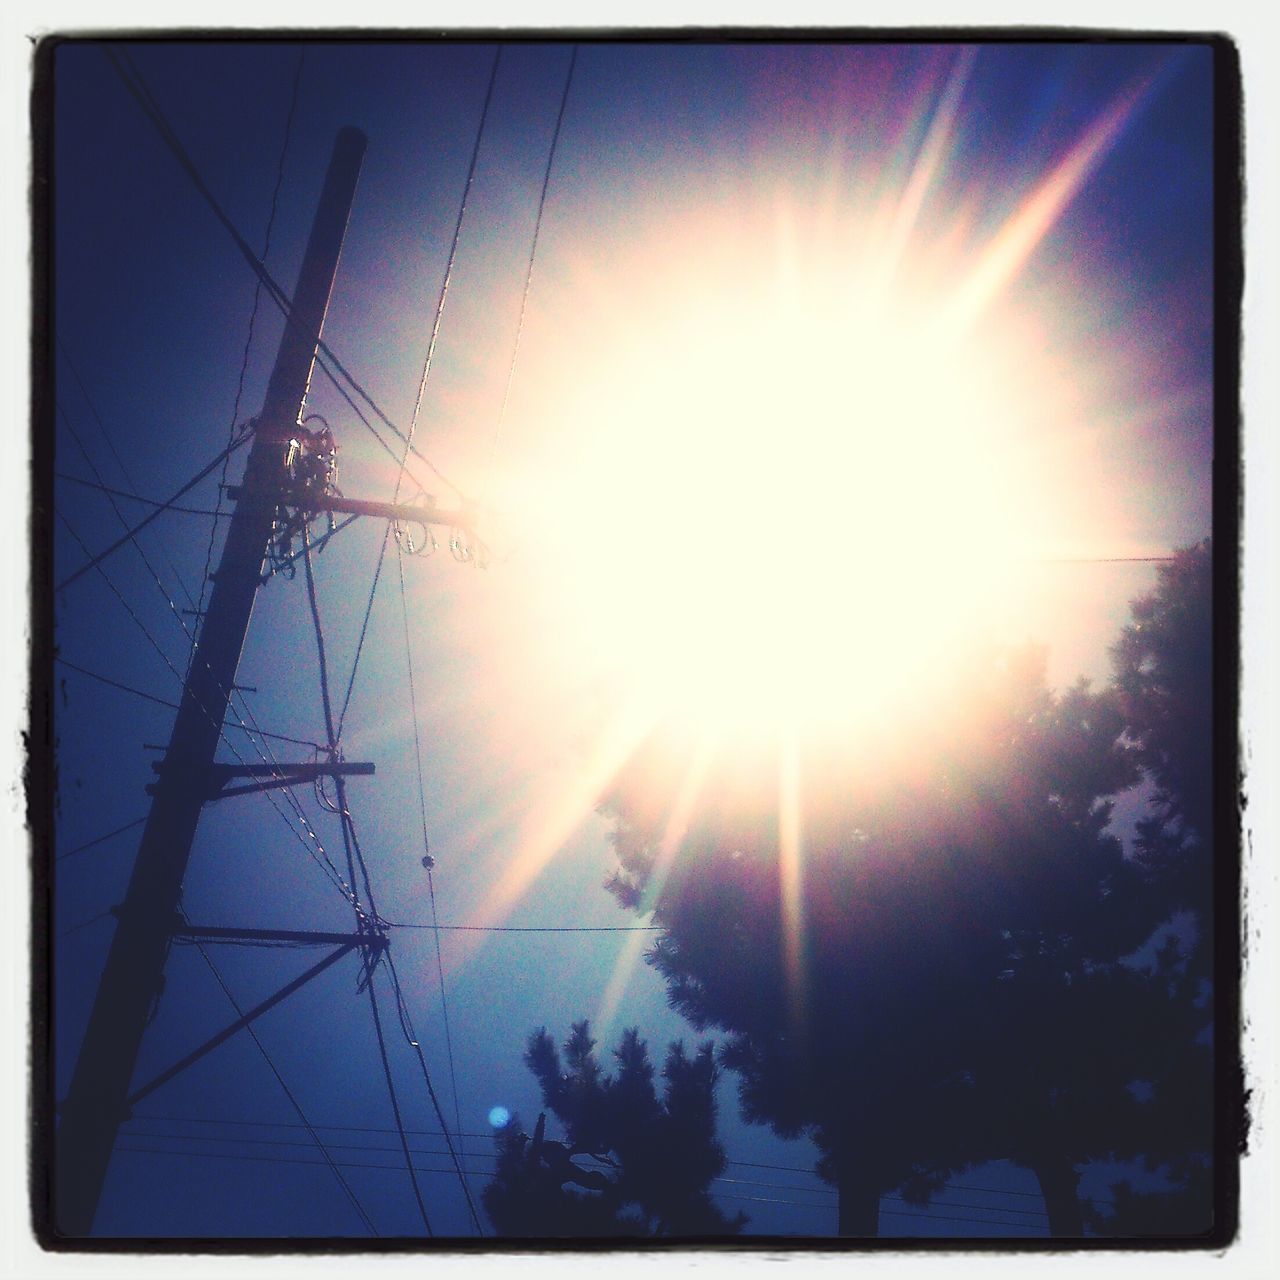 sun, sunbeam, lens flare, sunlight, transfer print, bright, power line, low angle view, sky, sunny, silhouette, auto post production filter, electricity pylon, nature, electricity, tranquility, back lit, blue, beauty in nature, power supply